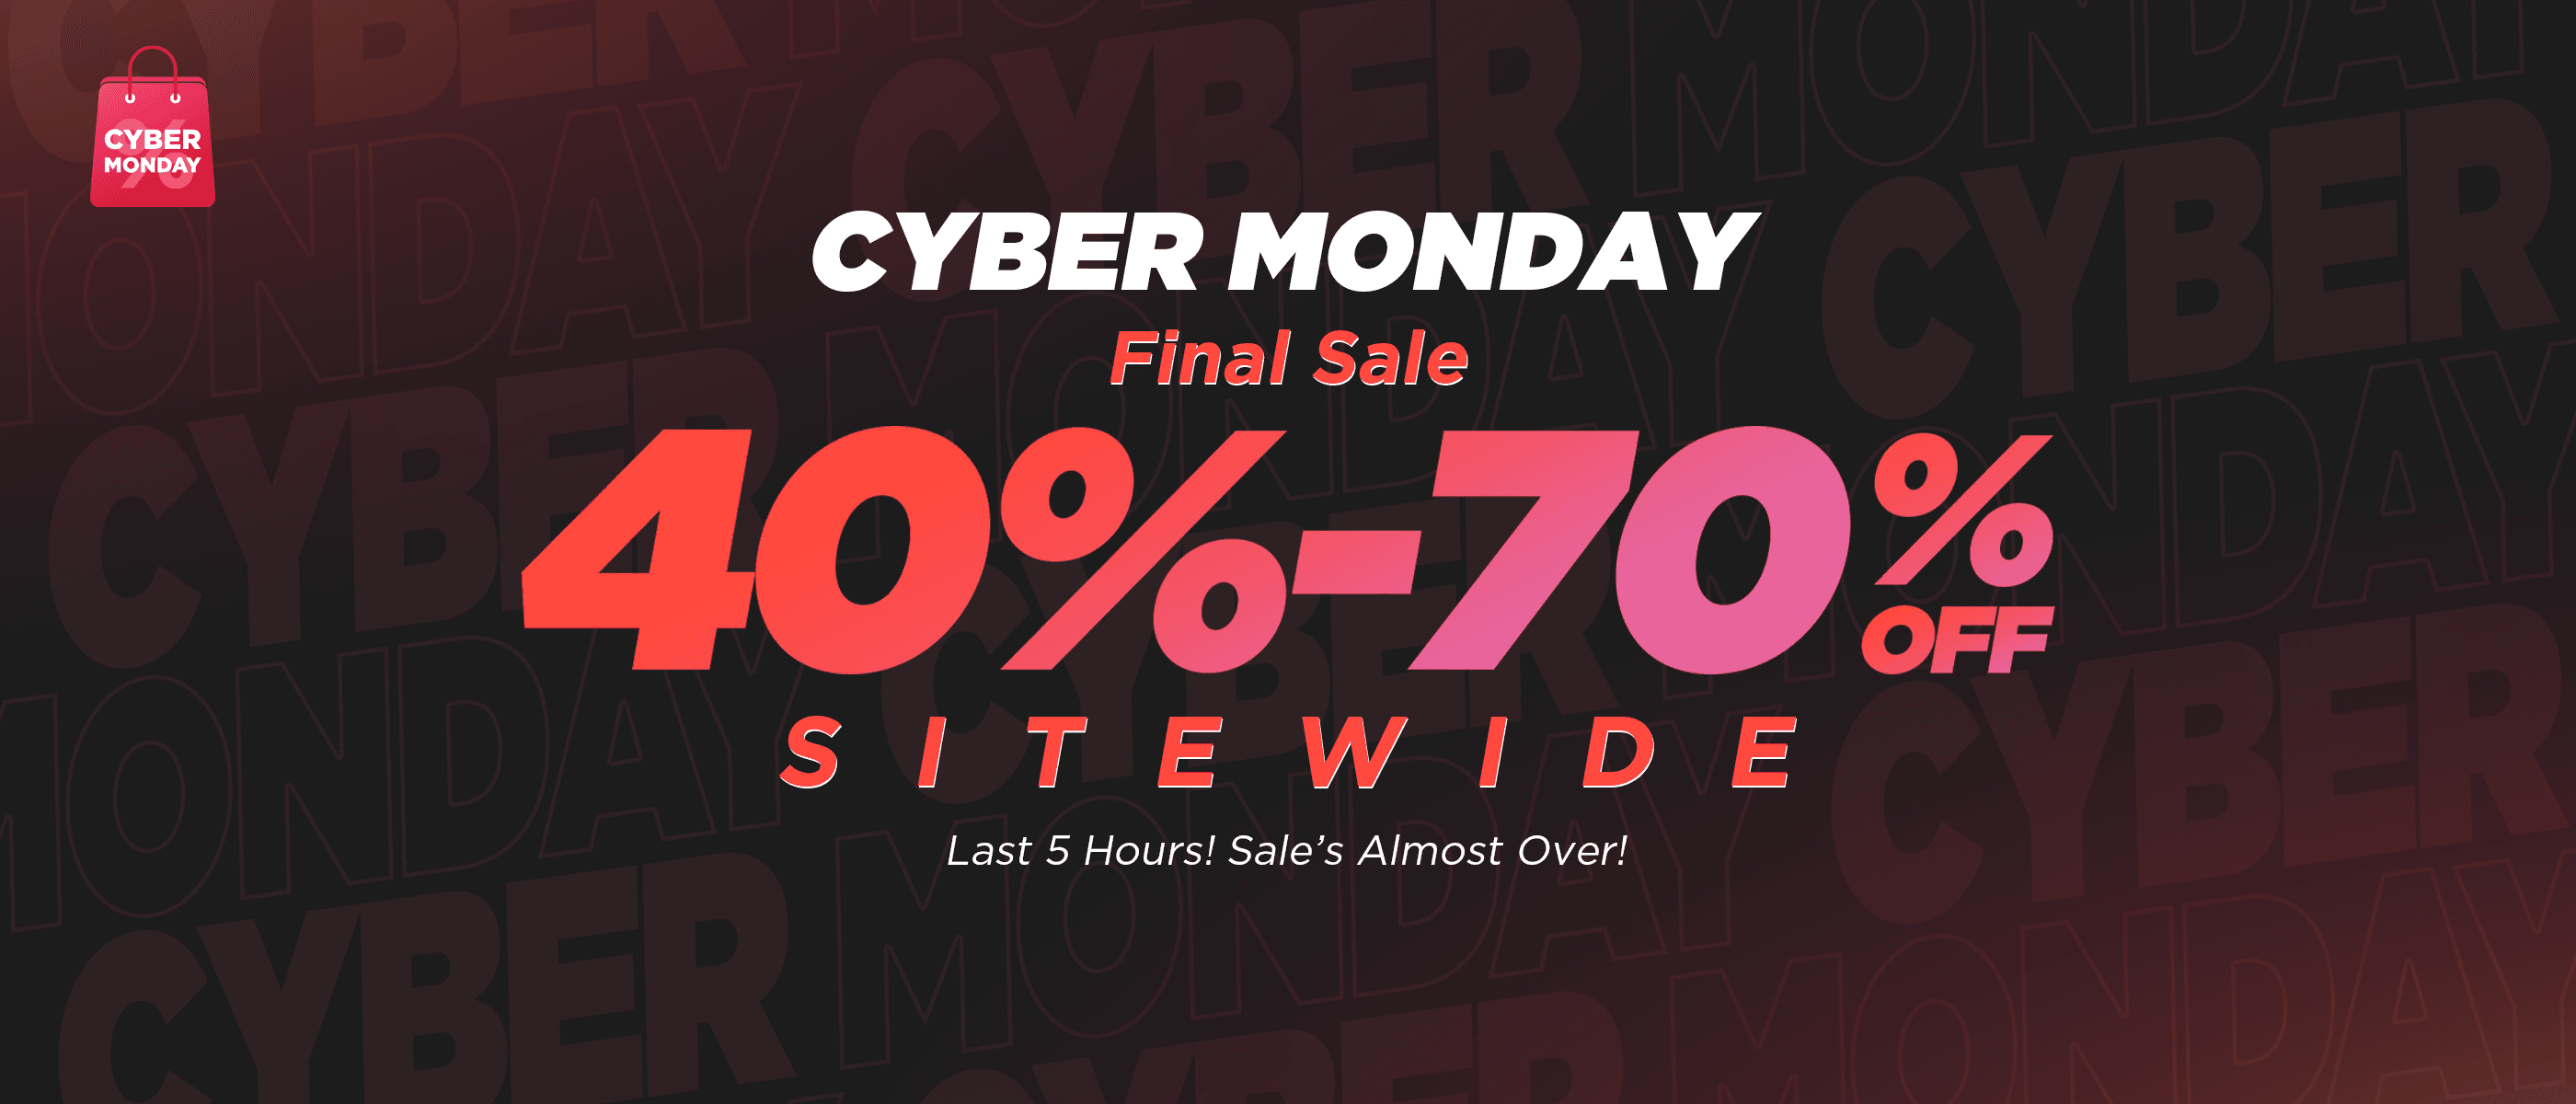 CYBER MONDAY 40-70% off